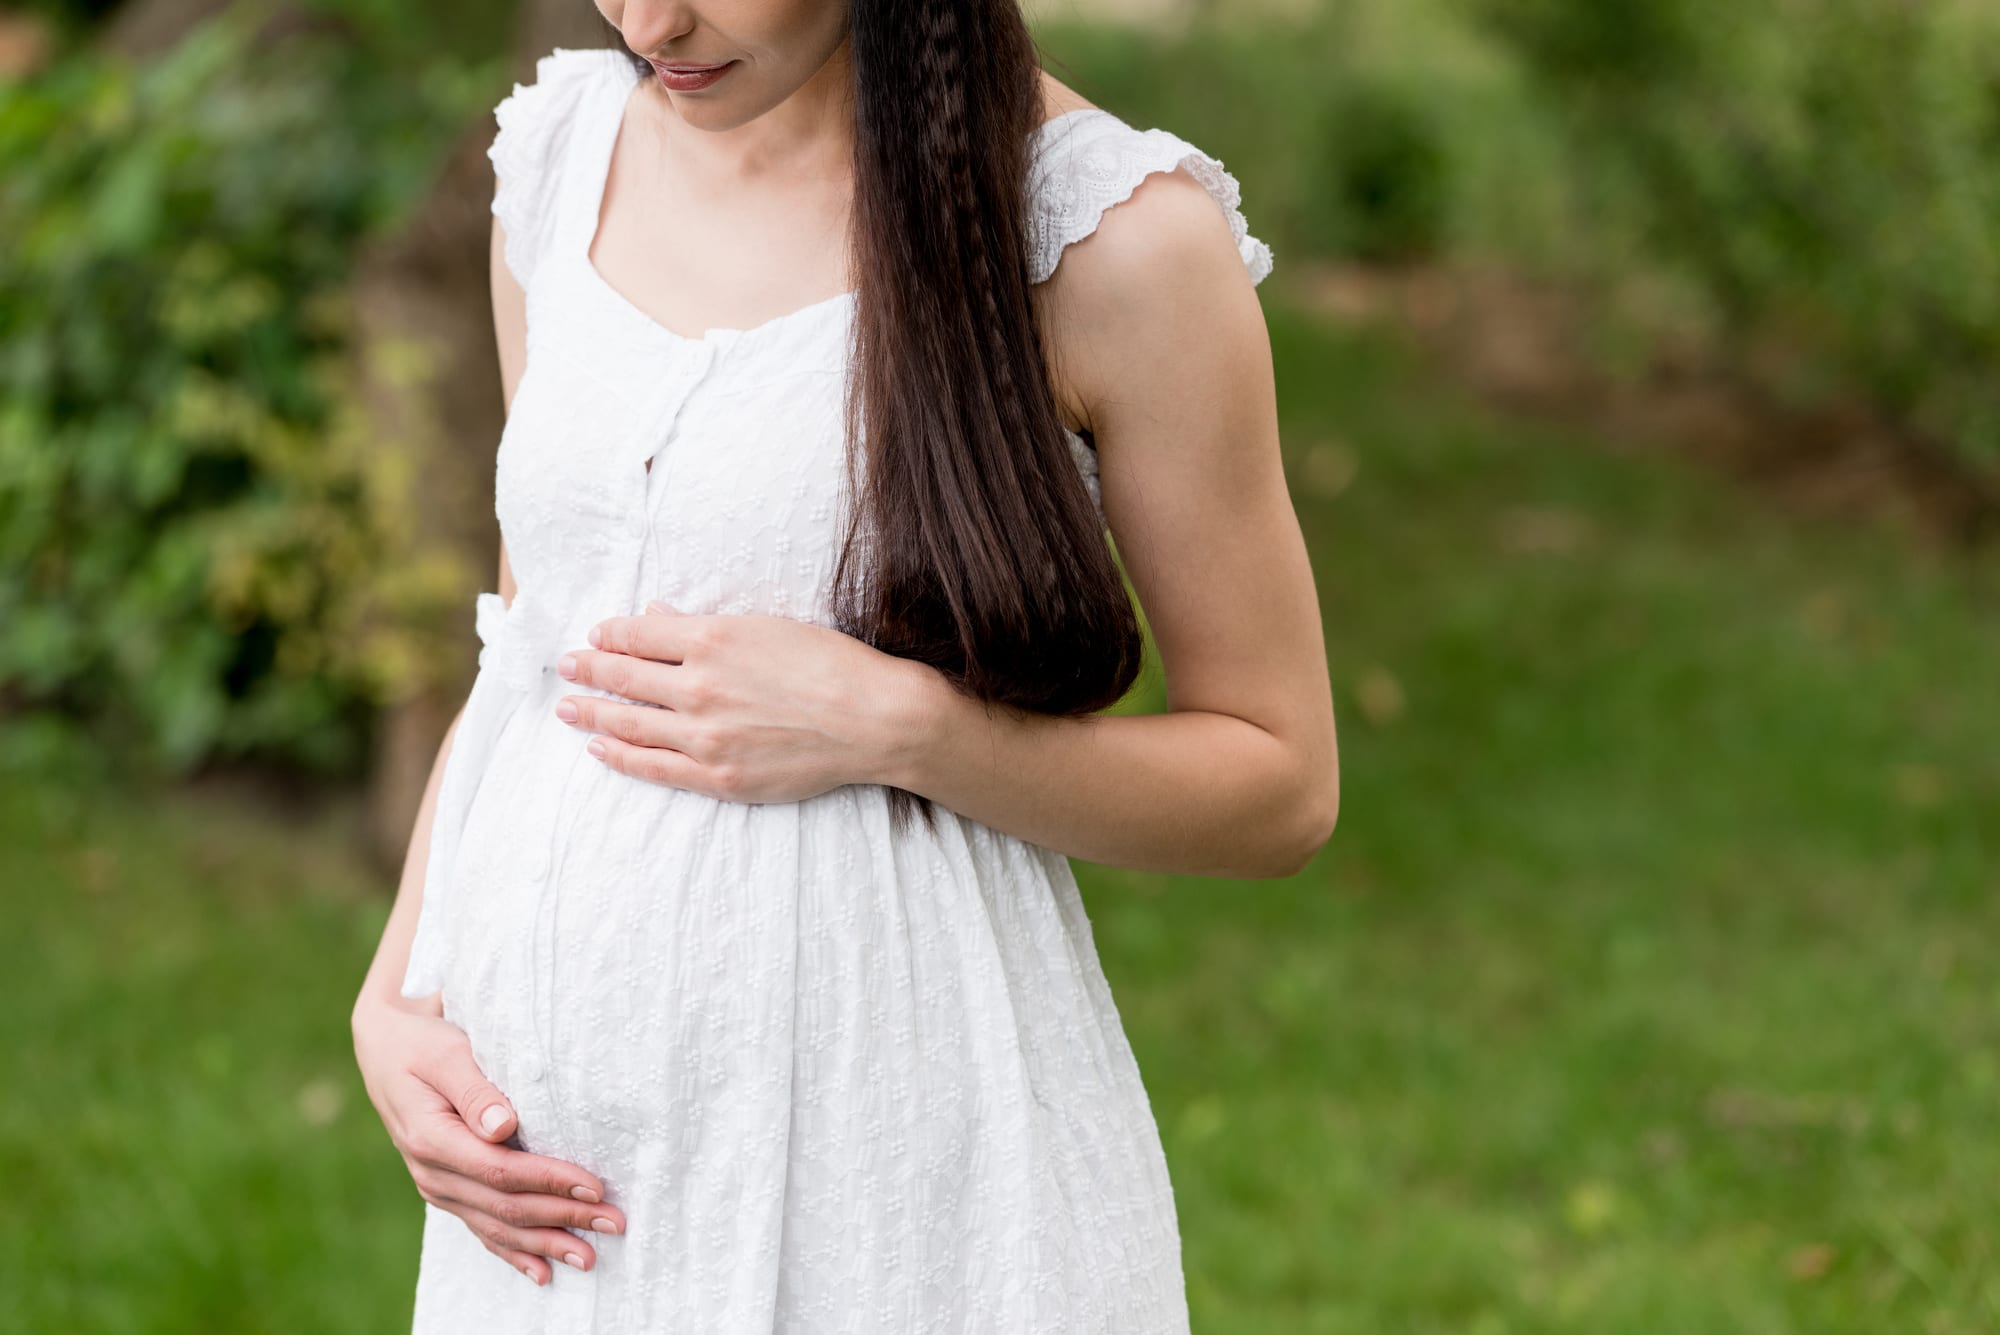 How to get pregnant with PCOS #getpregnantwithPCOS #howtogetpregnantwithPCOS #PCOSandpregnancy